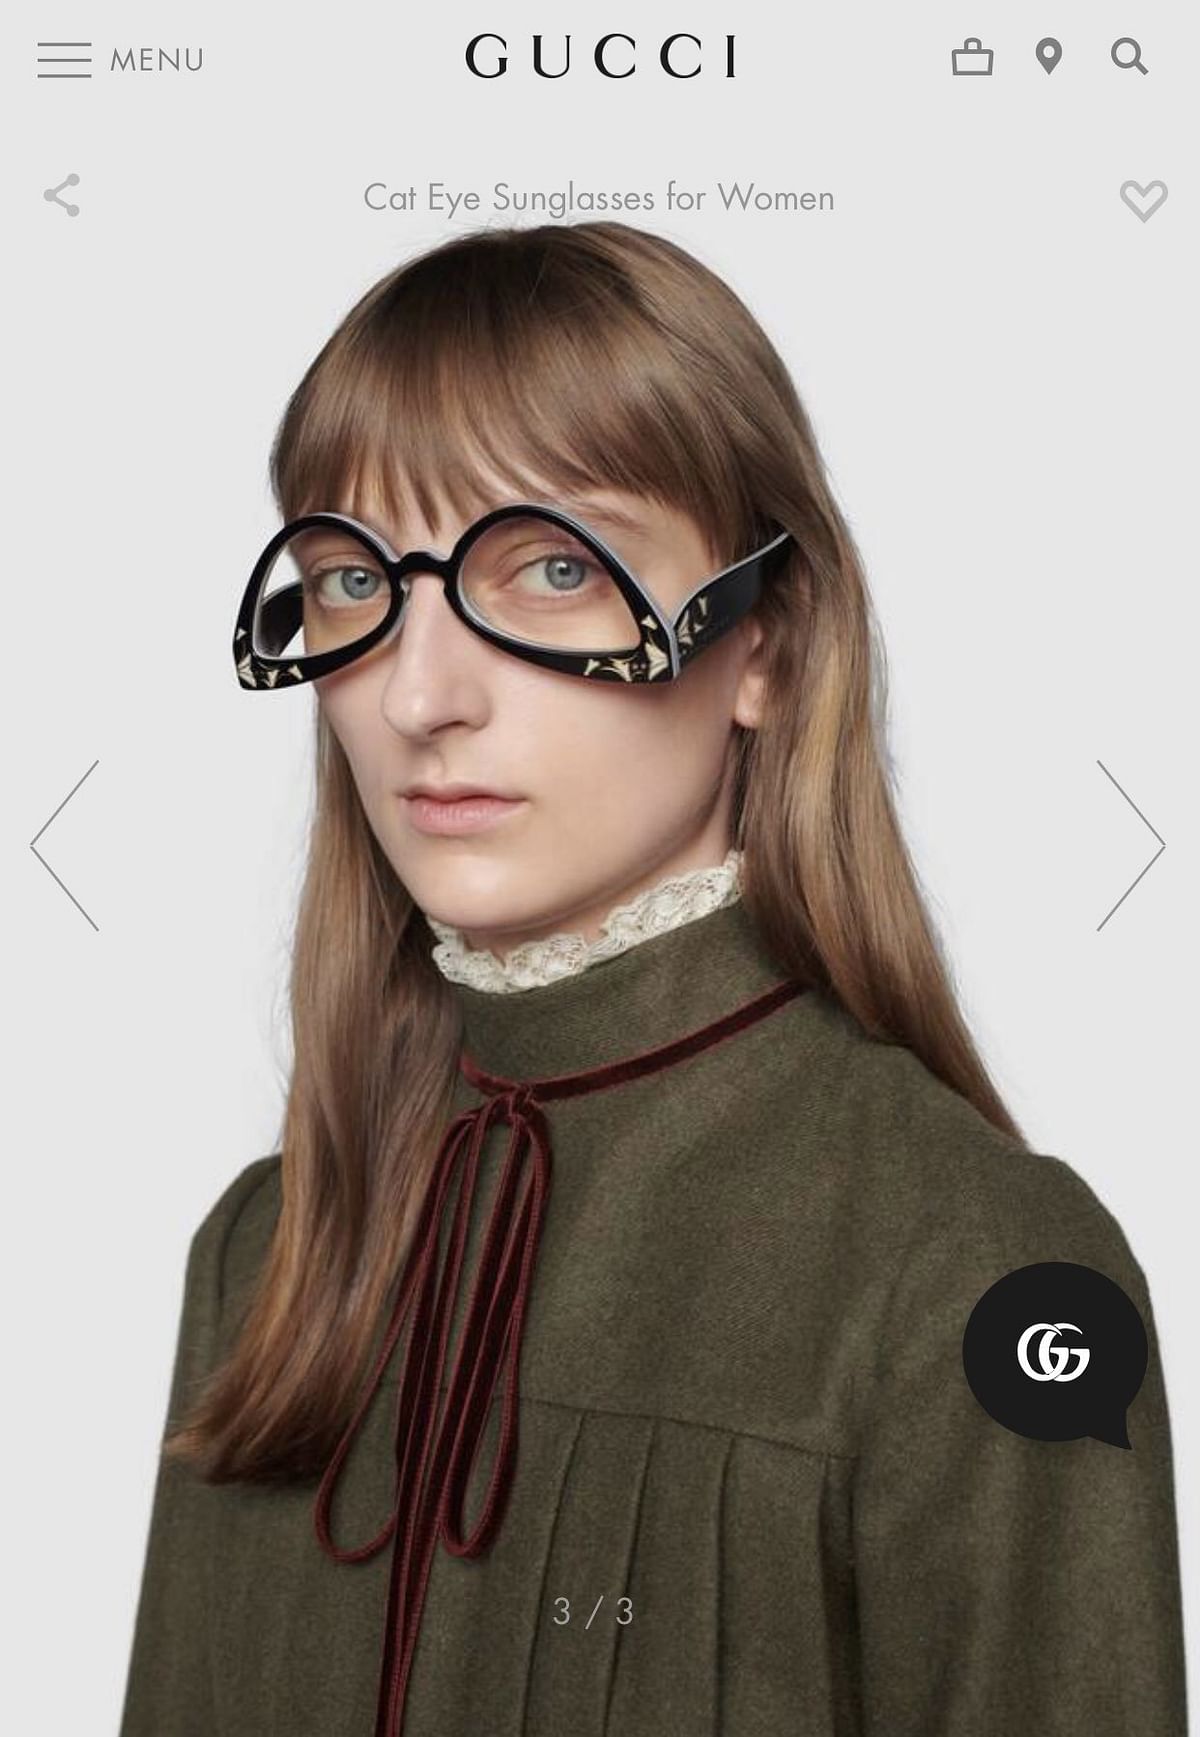 Gucci's new product has left shocked consumers.